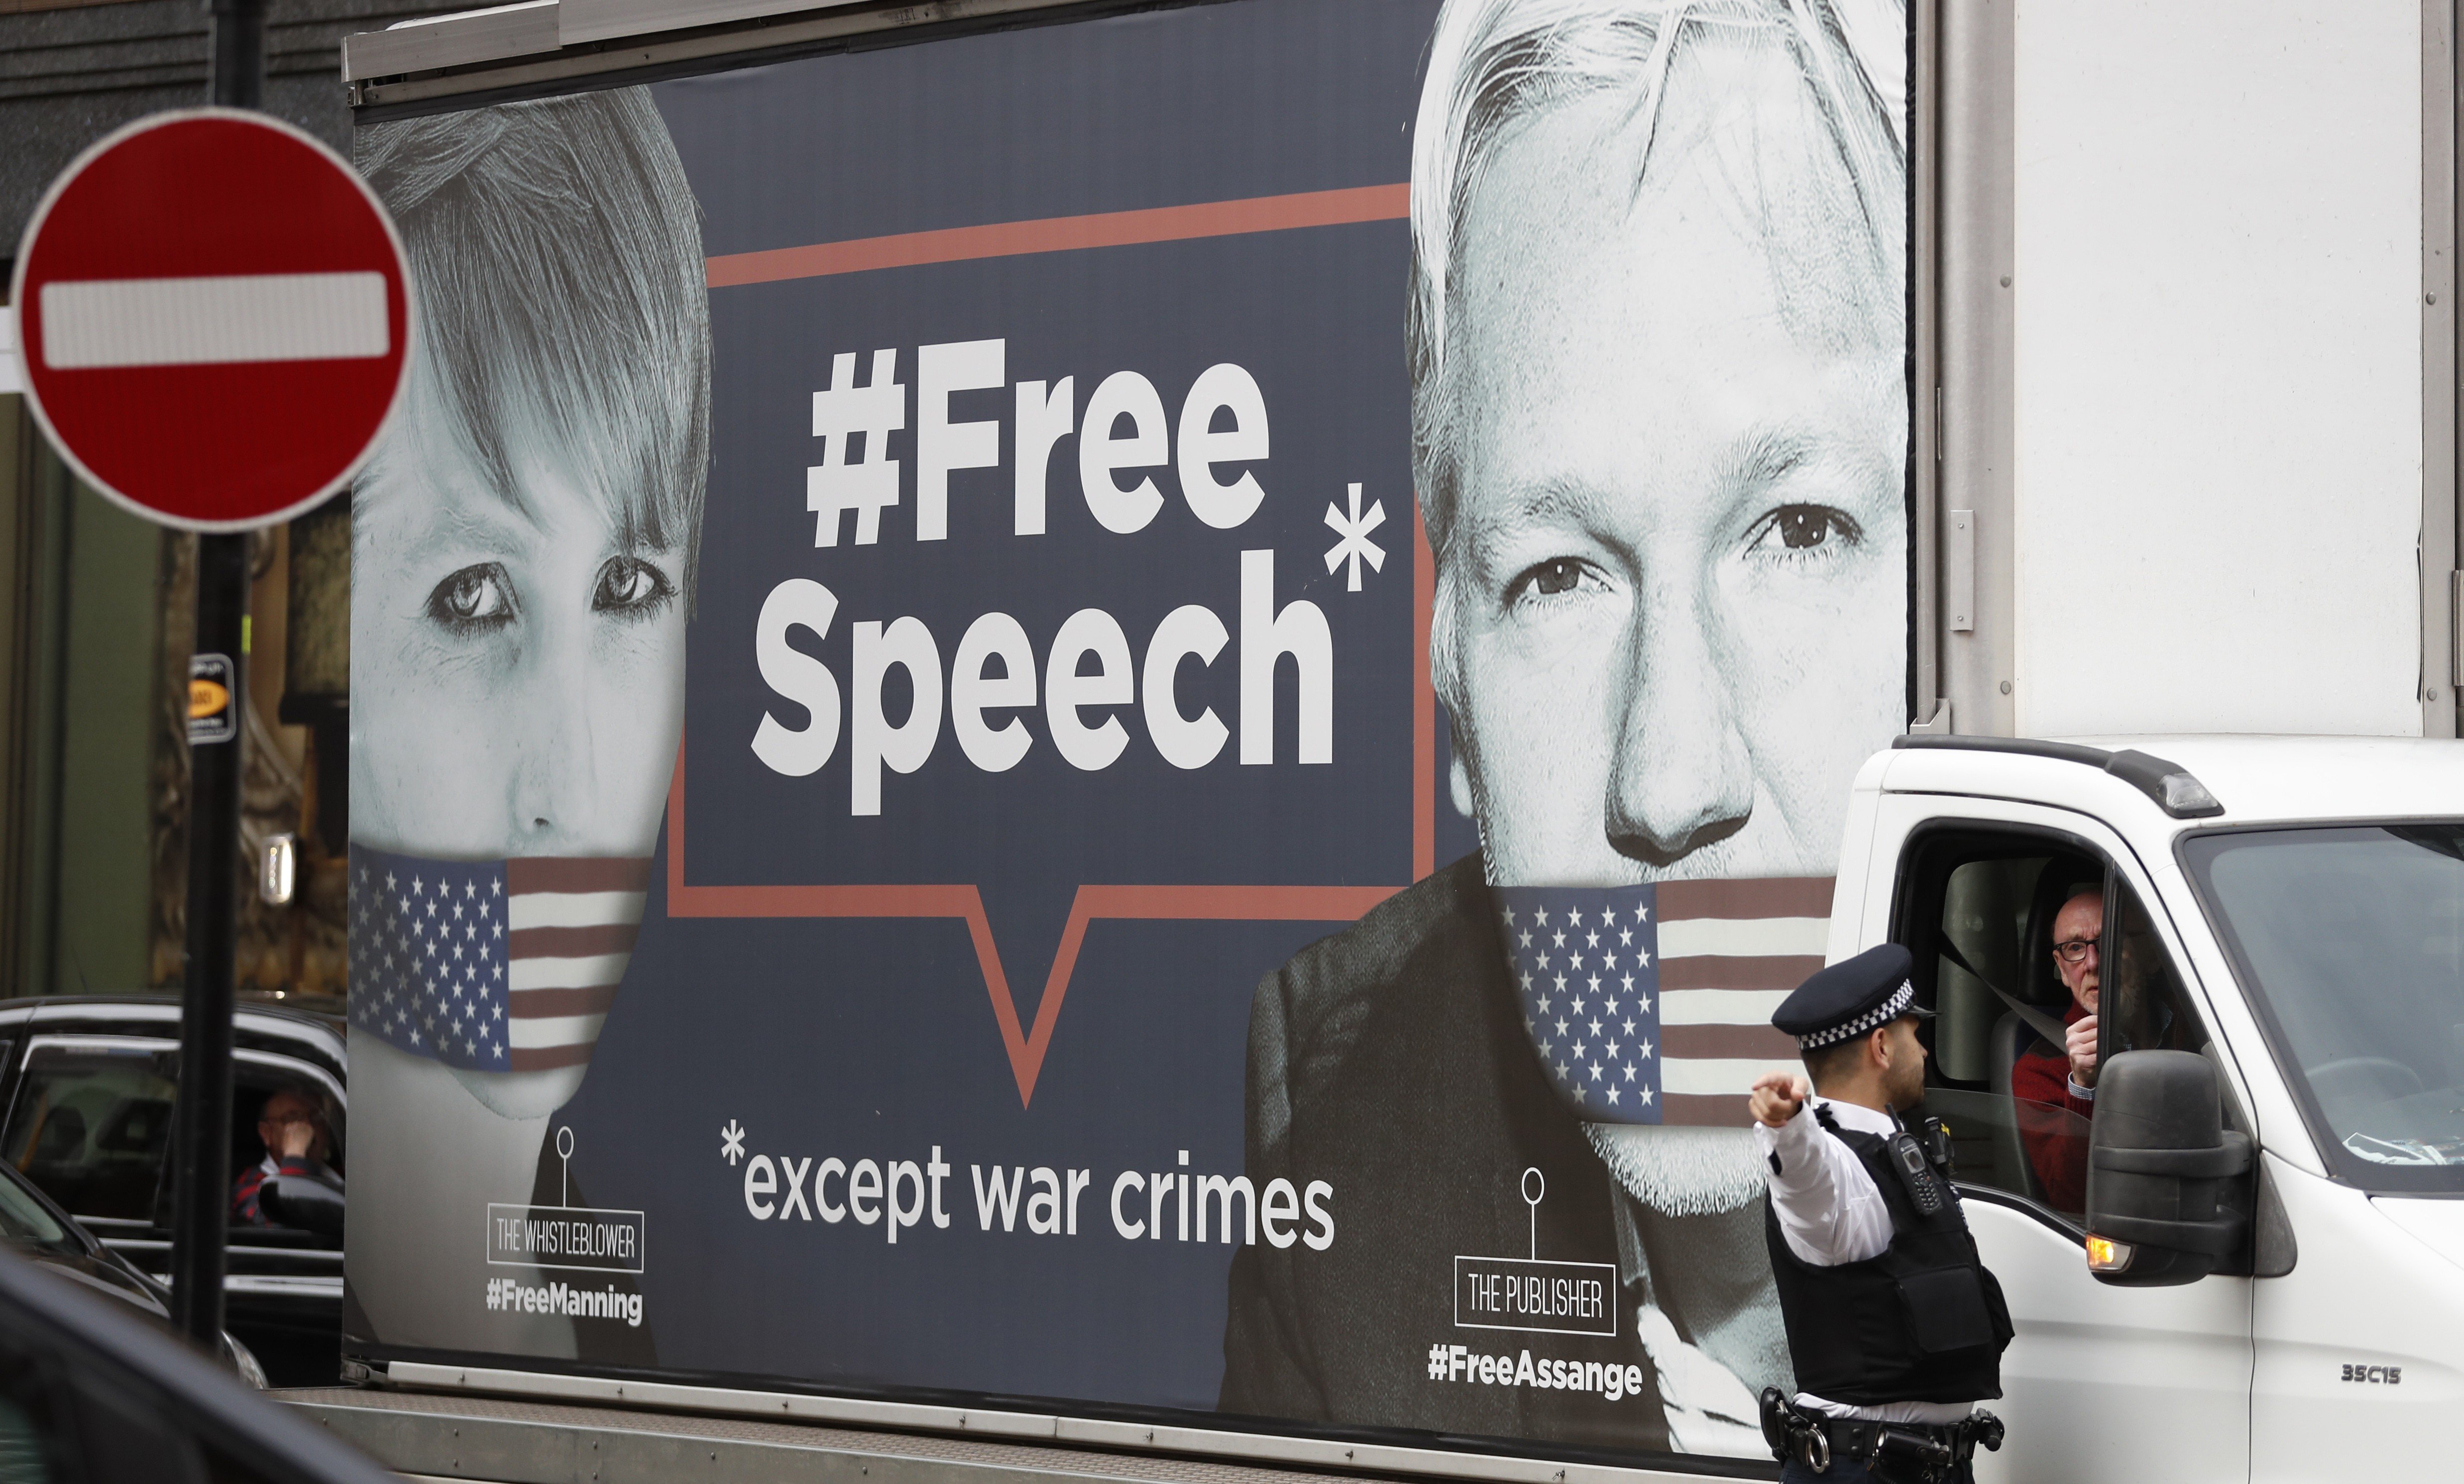 A policeman directs a van with a “Free Speech” placard and the images of Wikileaks founder Julian Assange and whistle-blower Chelsea Manning on its side, near the Ecuadorian Embassy, in London. Photo: AP